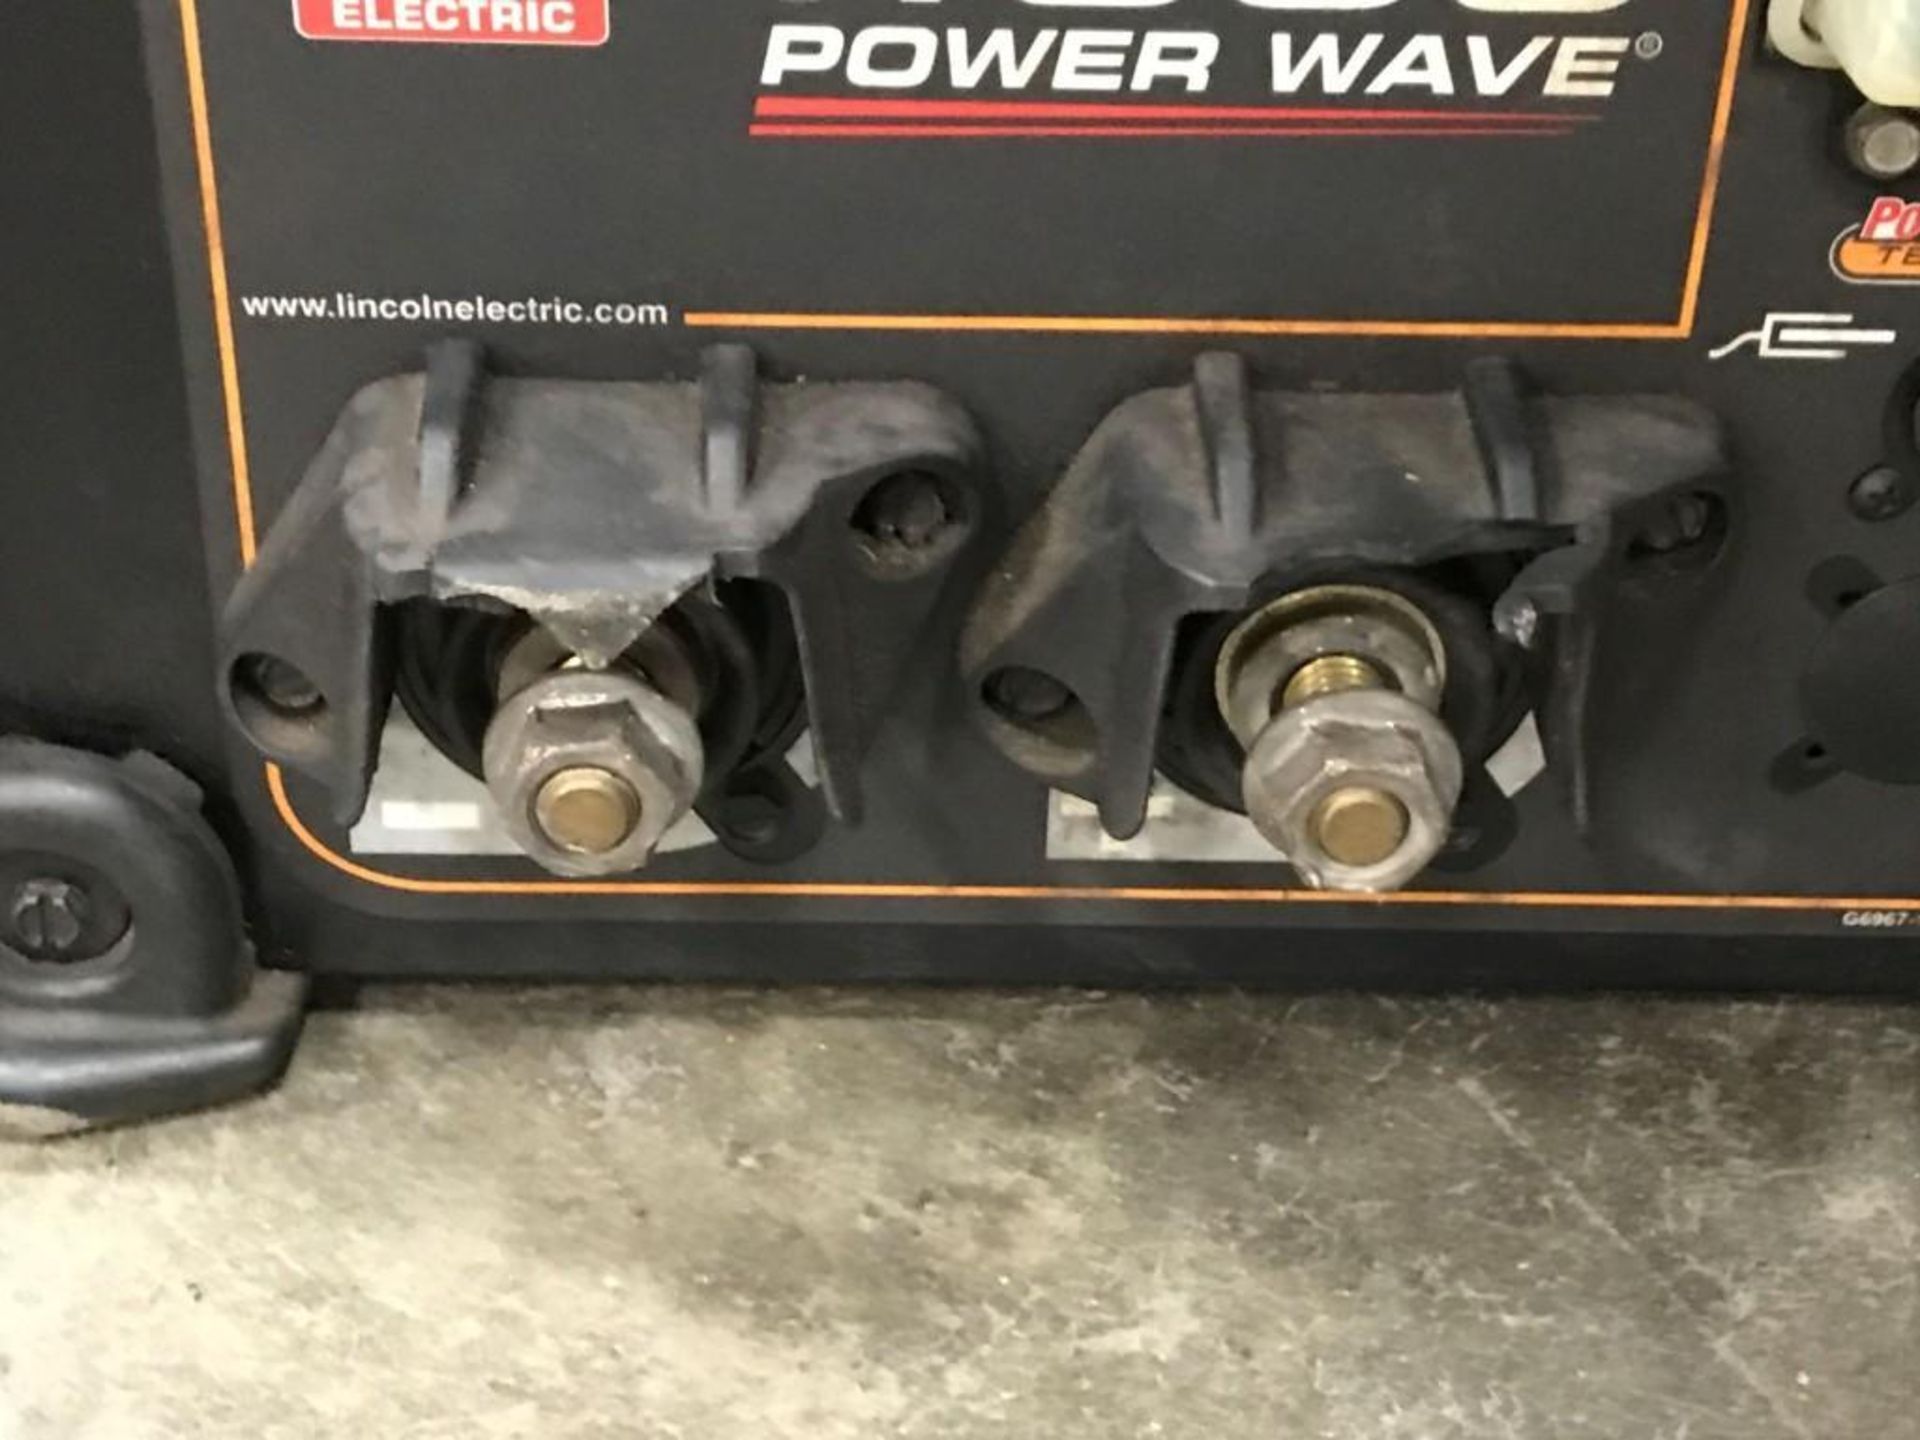 Lincoln R350 Power Wave Welder - Image 6 of 6